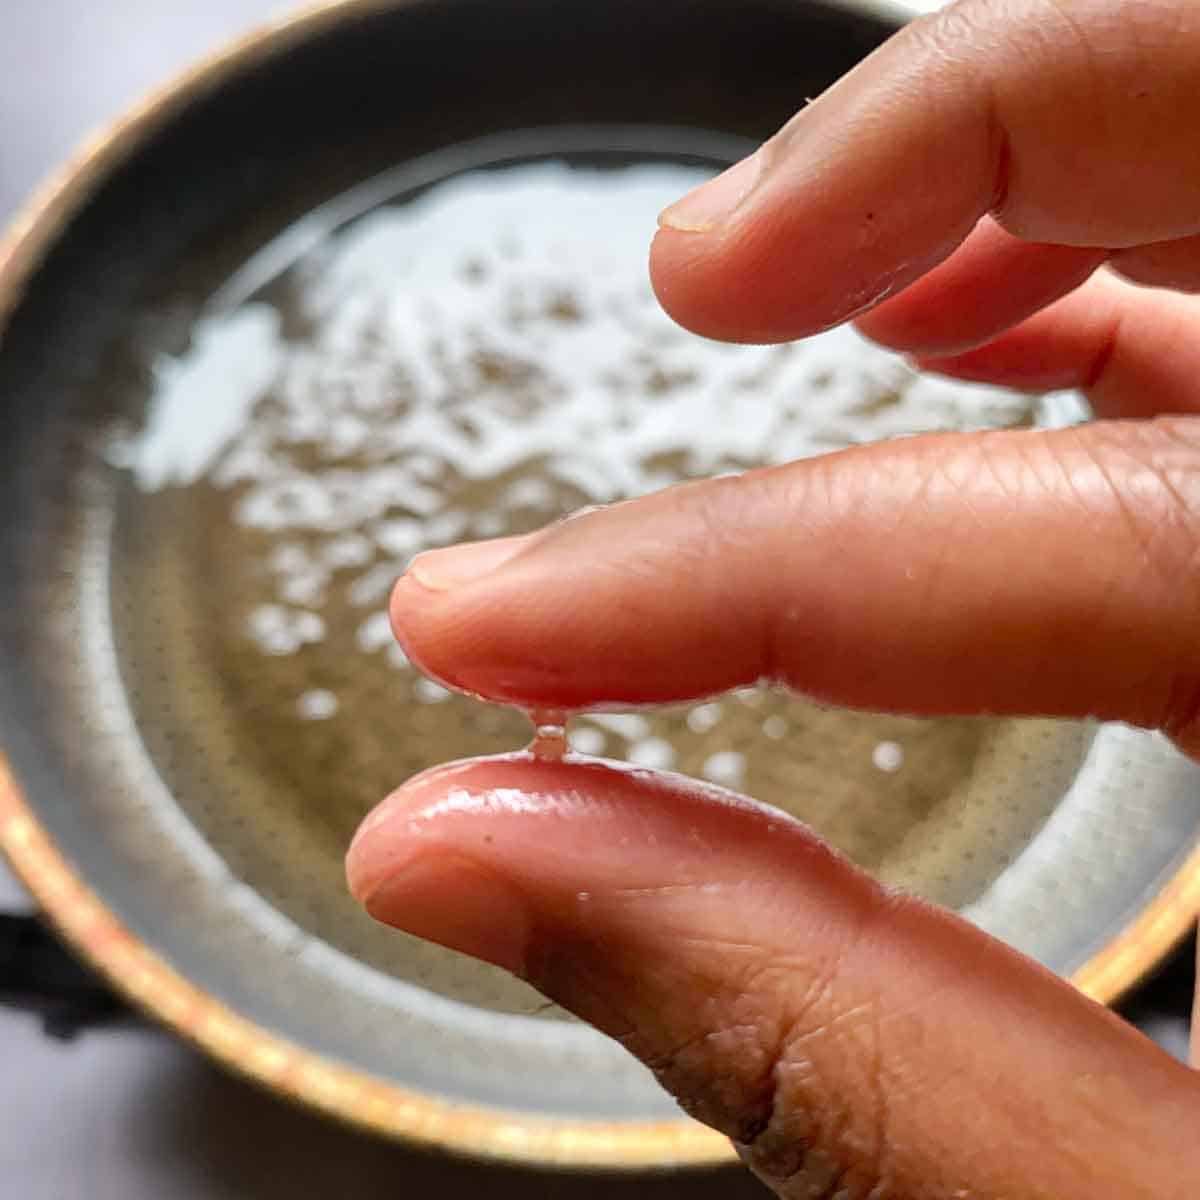 Silky sugar syrup in between two fingers